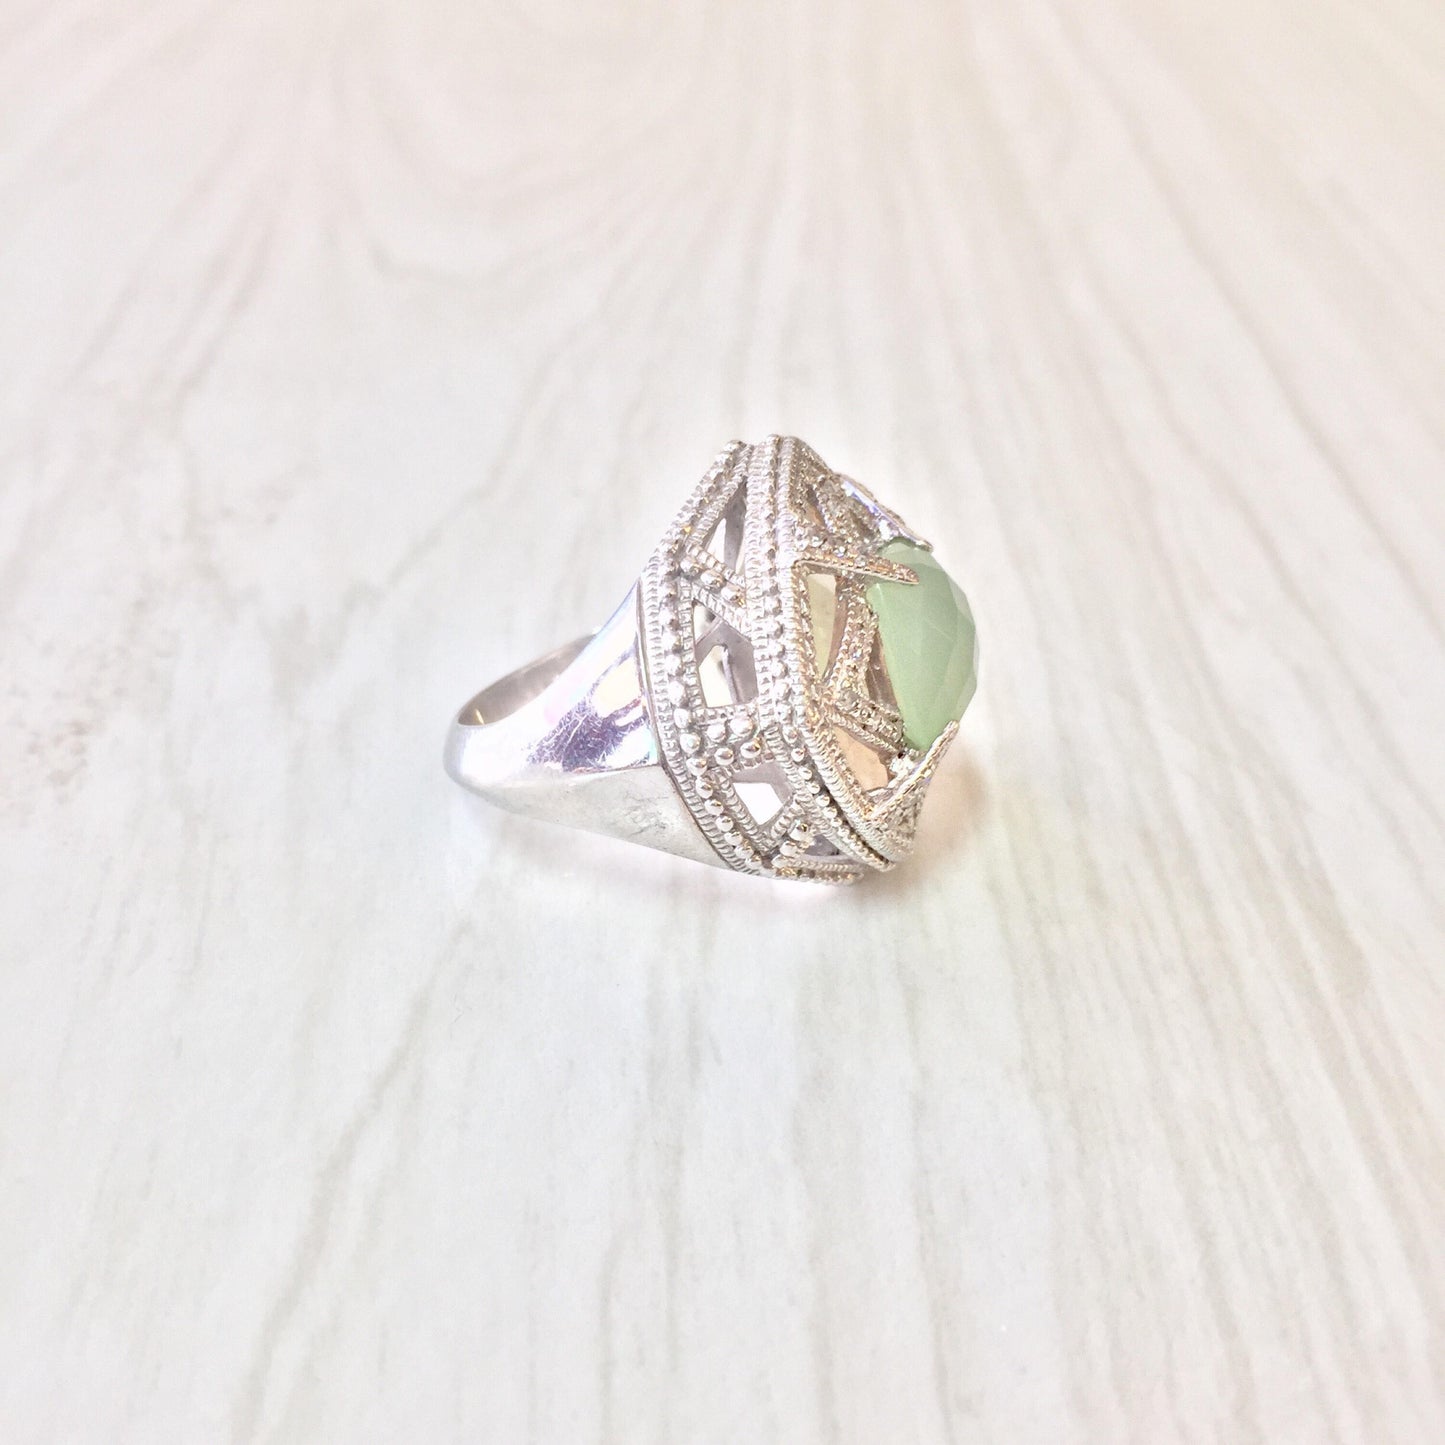 Elegant vintage sterling silver ring with light green center stone and intricate detailing, perfect as a unique engagement or statement ring gift for her.